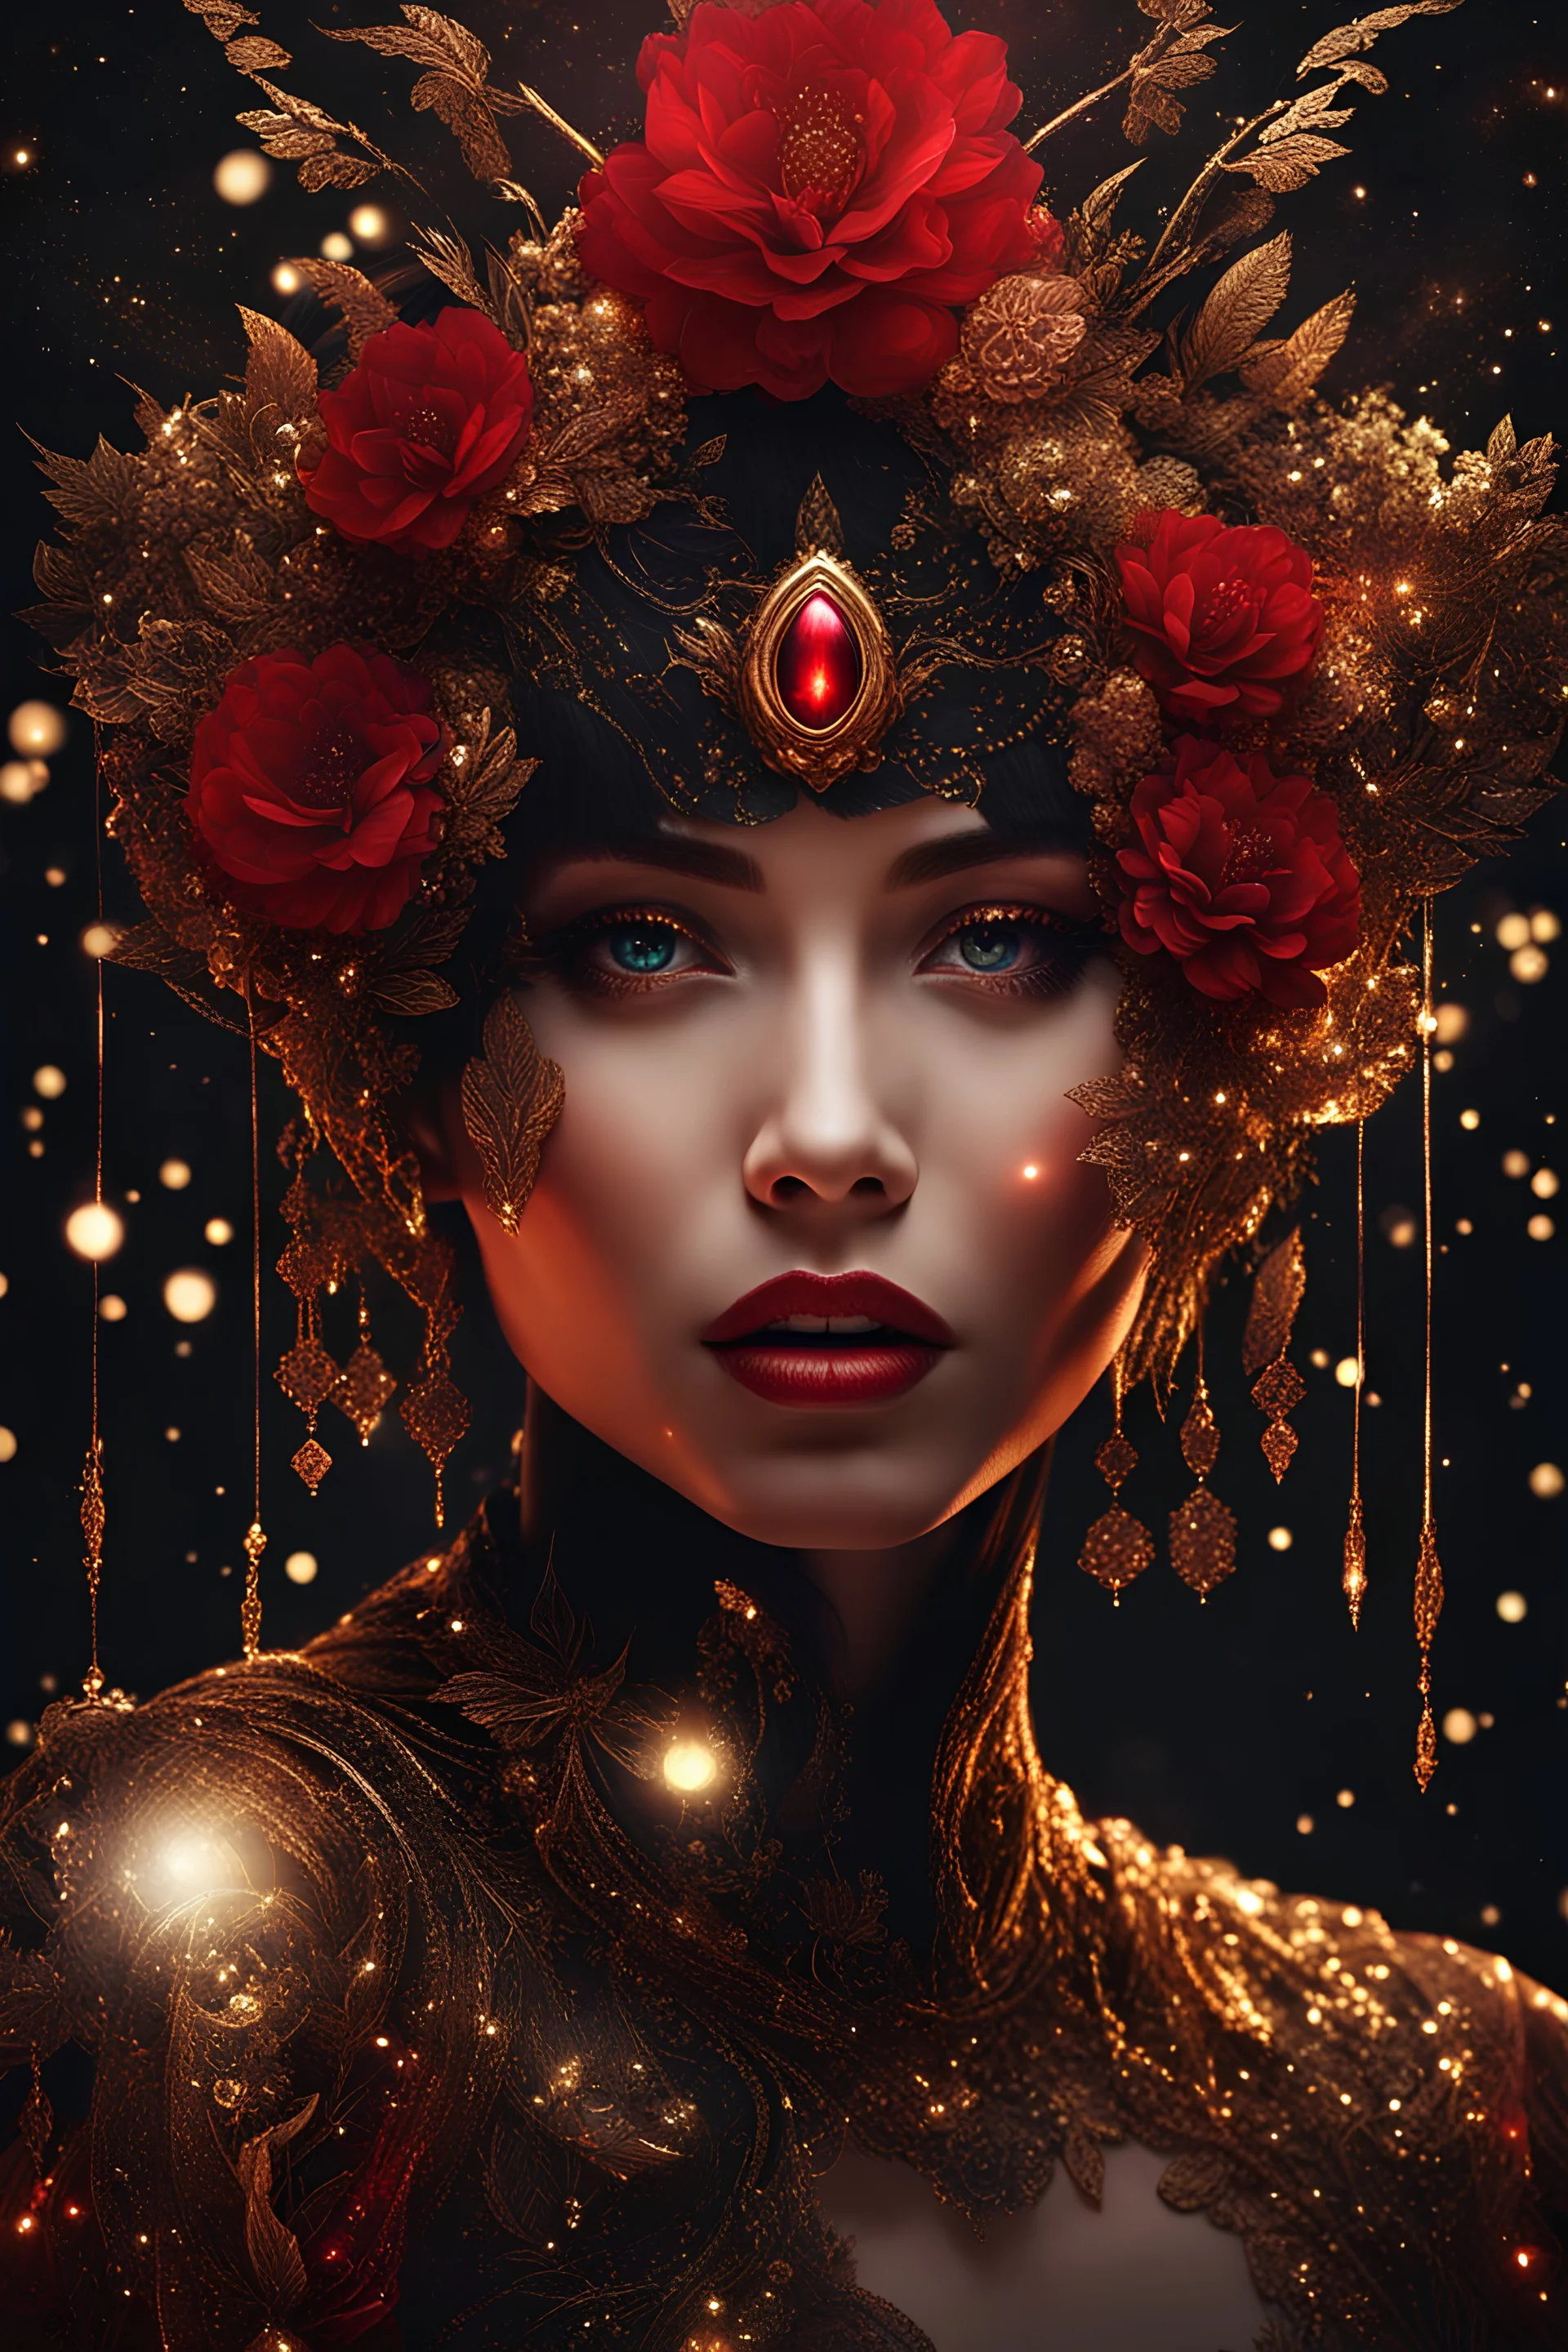 black and red and gold theme, close-up bioluminescent sparkling face of a woman surrounded by gold sparkles and black flowers, crimson red dyed face, expressive and mysterious, universe in eyes, eyes pointed upwards, in a mysterious dark landscape, detailed matte painting, fantastical, intricate detail, splash screen, colorful, fantasy concept art, 8k resolution, Unreal Engine 5, centered, high contrast sharp focus, black and red theme, glossed and polished